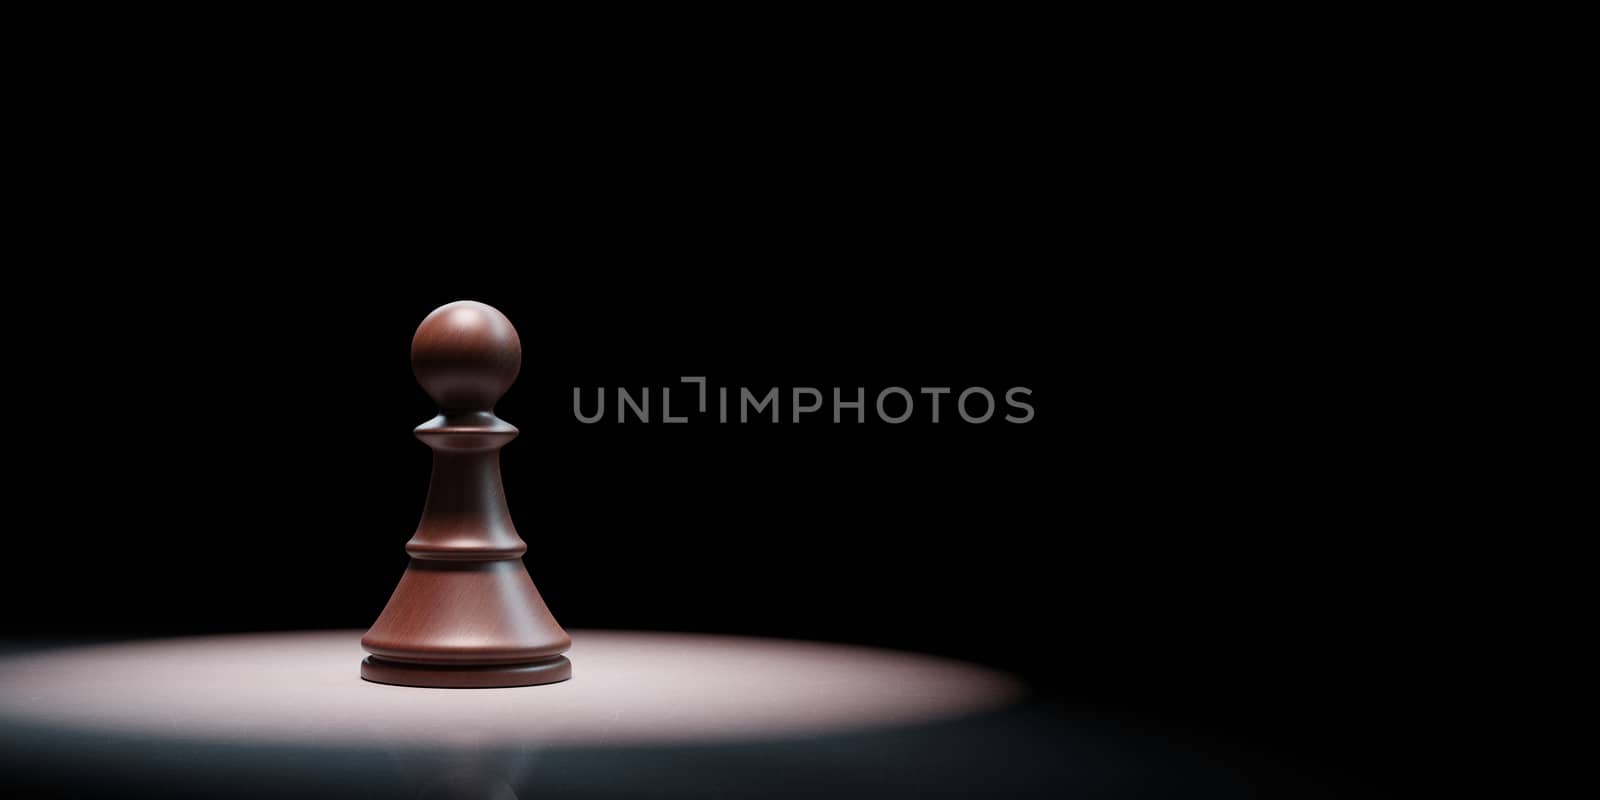 One Black Wooden Chess Pawn Spotlighted on Black Background with Copy Space 3D Illustration